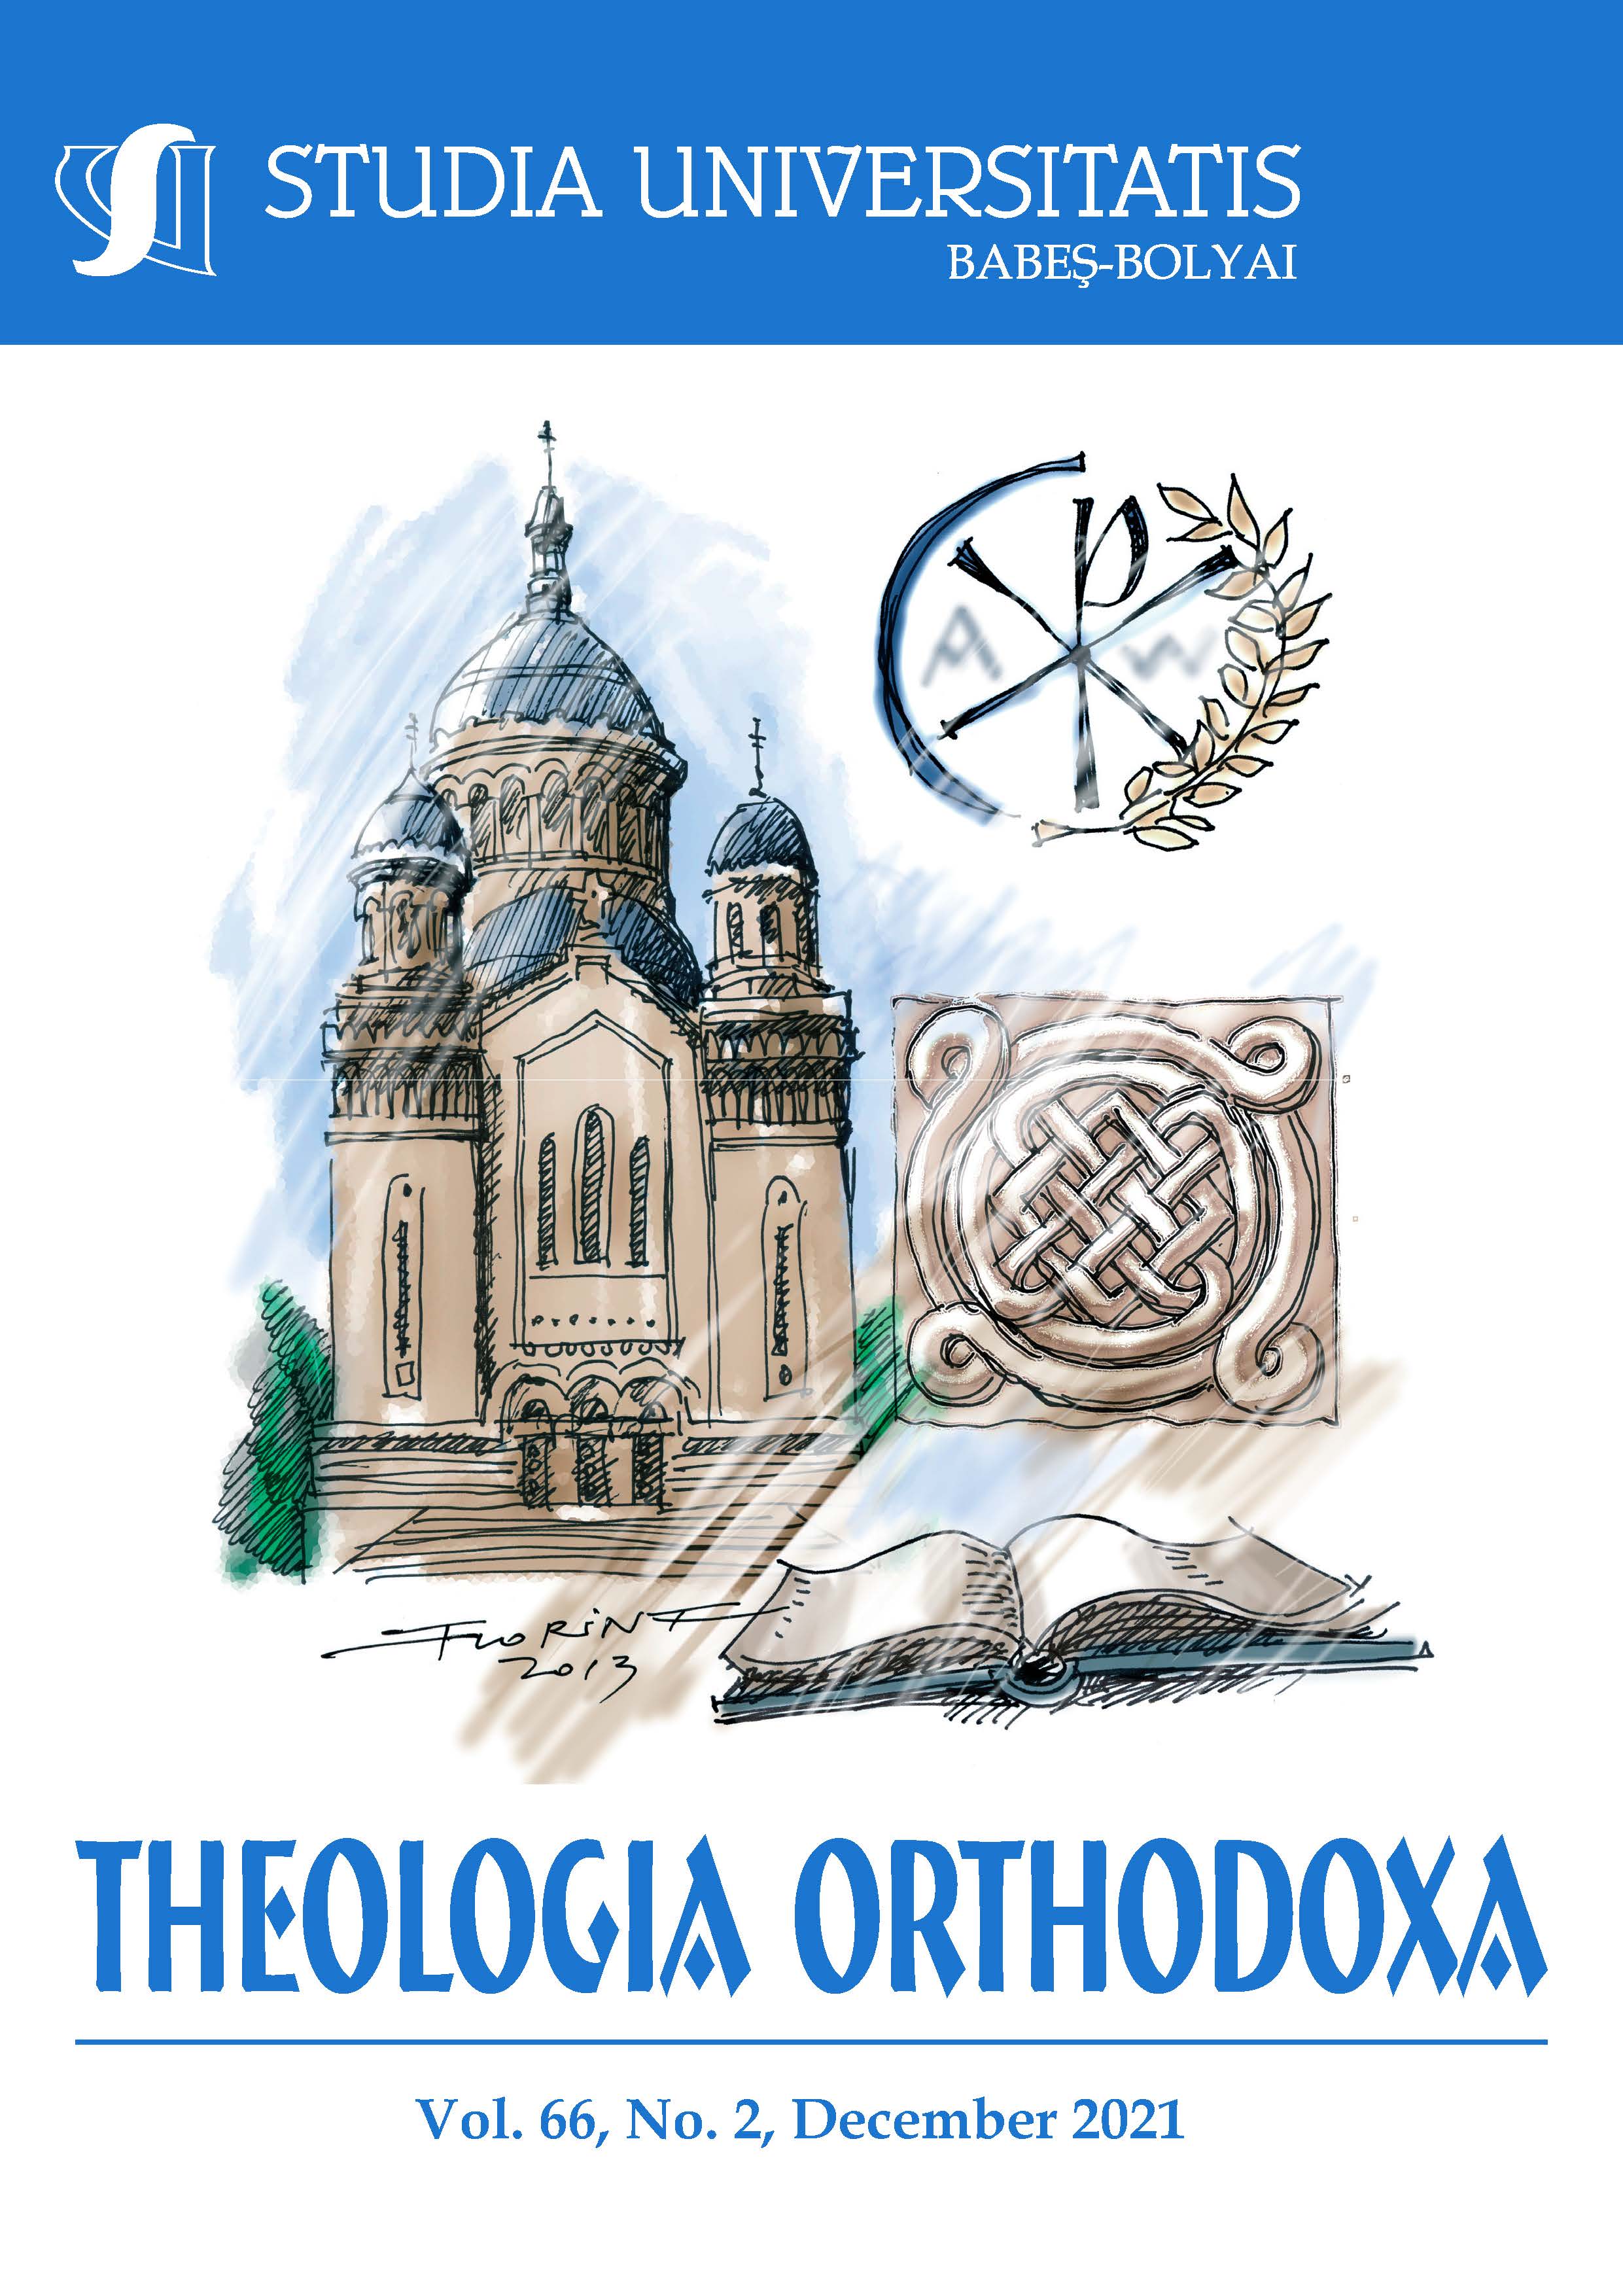 FOLLOWING JESUS CHRIST. UNDERSTANDING ORTHODOX MISSION TODAY, IN THEORY AND PRAXIS Cover Image